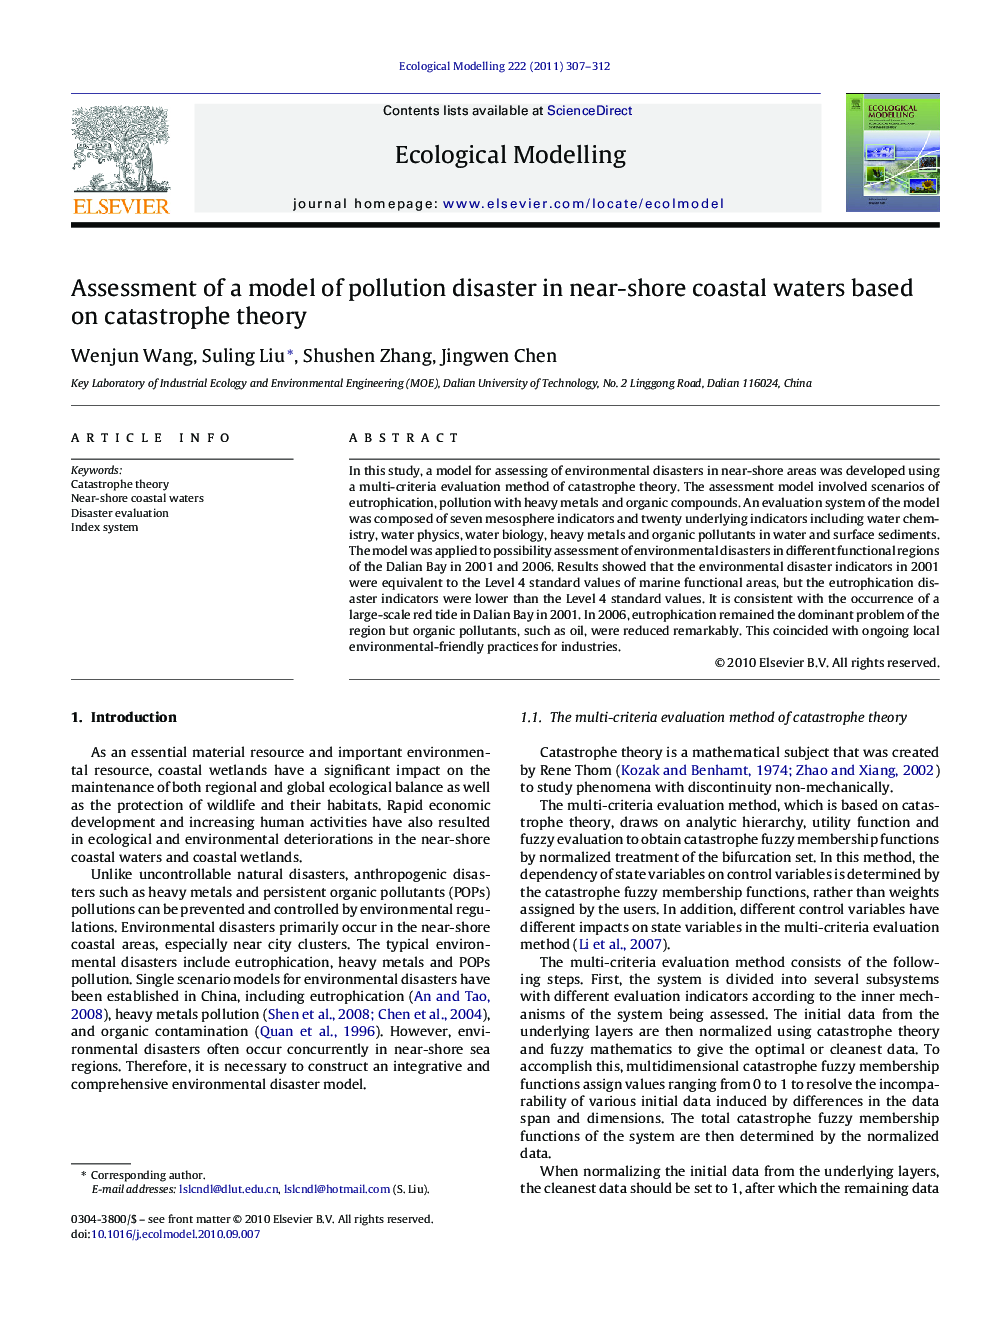 Assessment of a model of pollution disaster in near-shore coastal waters based on catastrophe theory